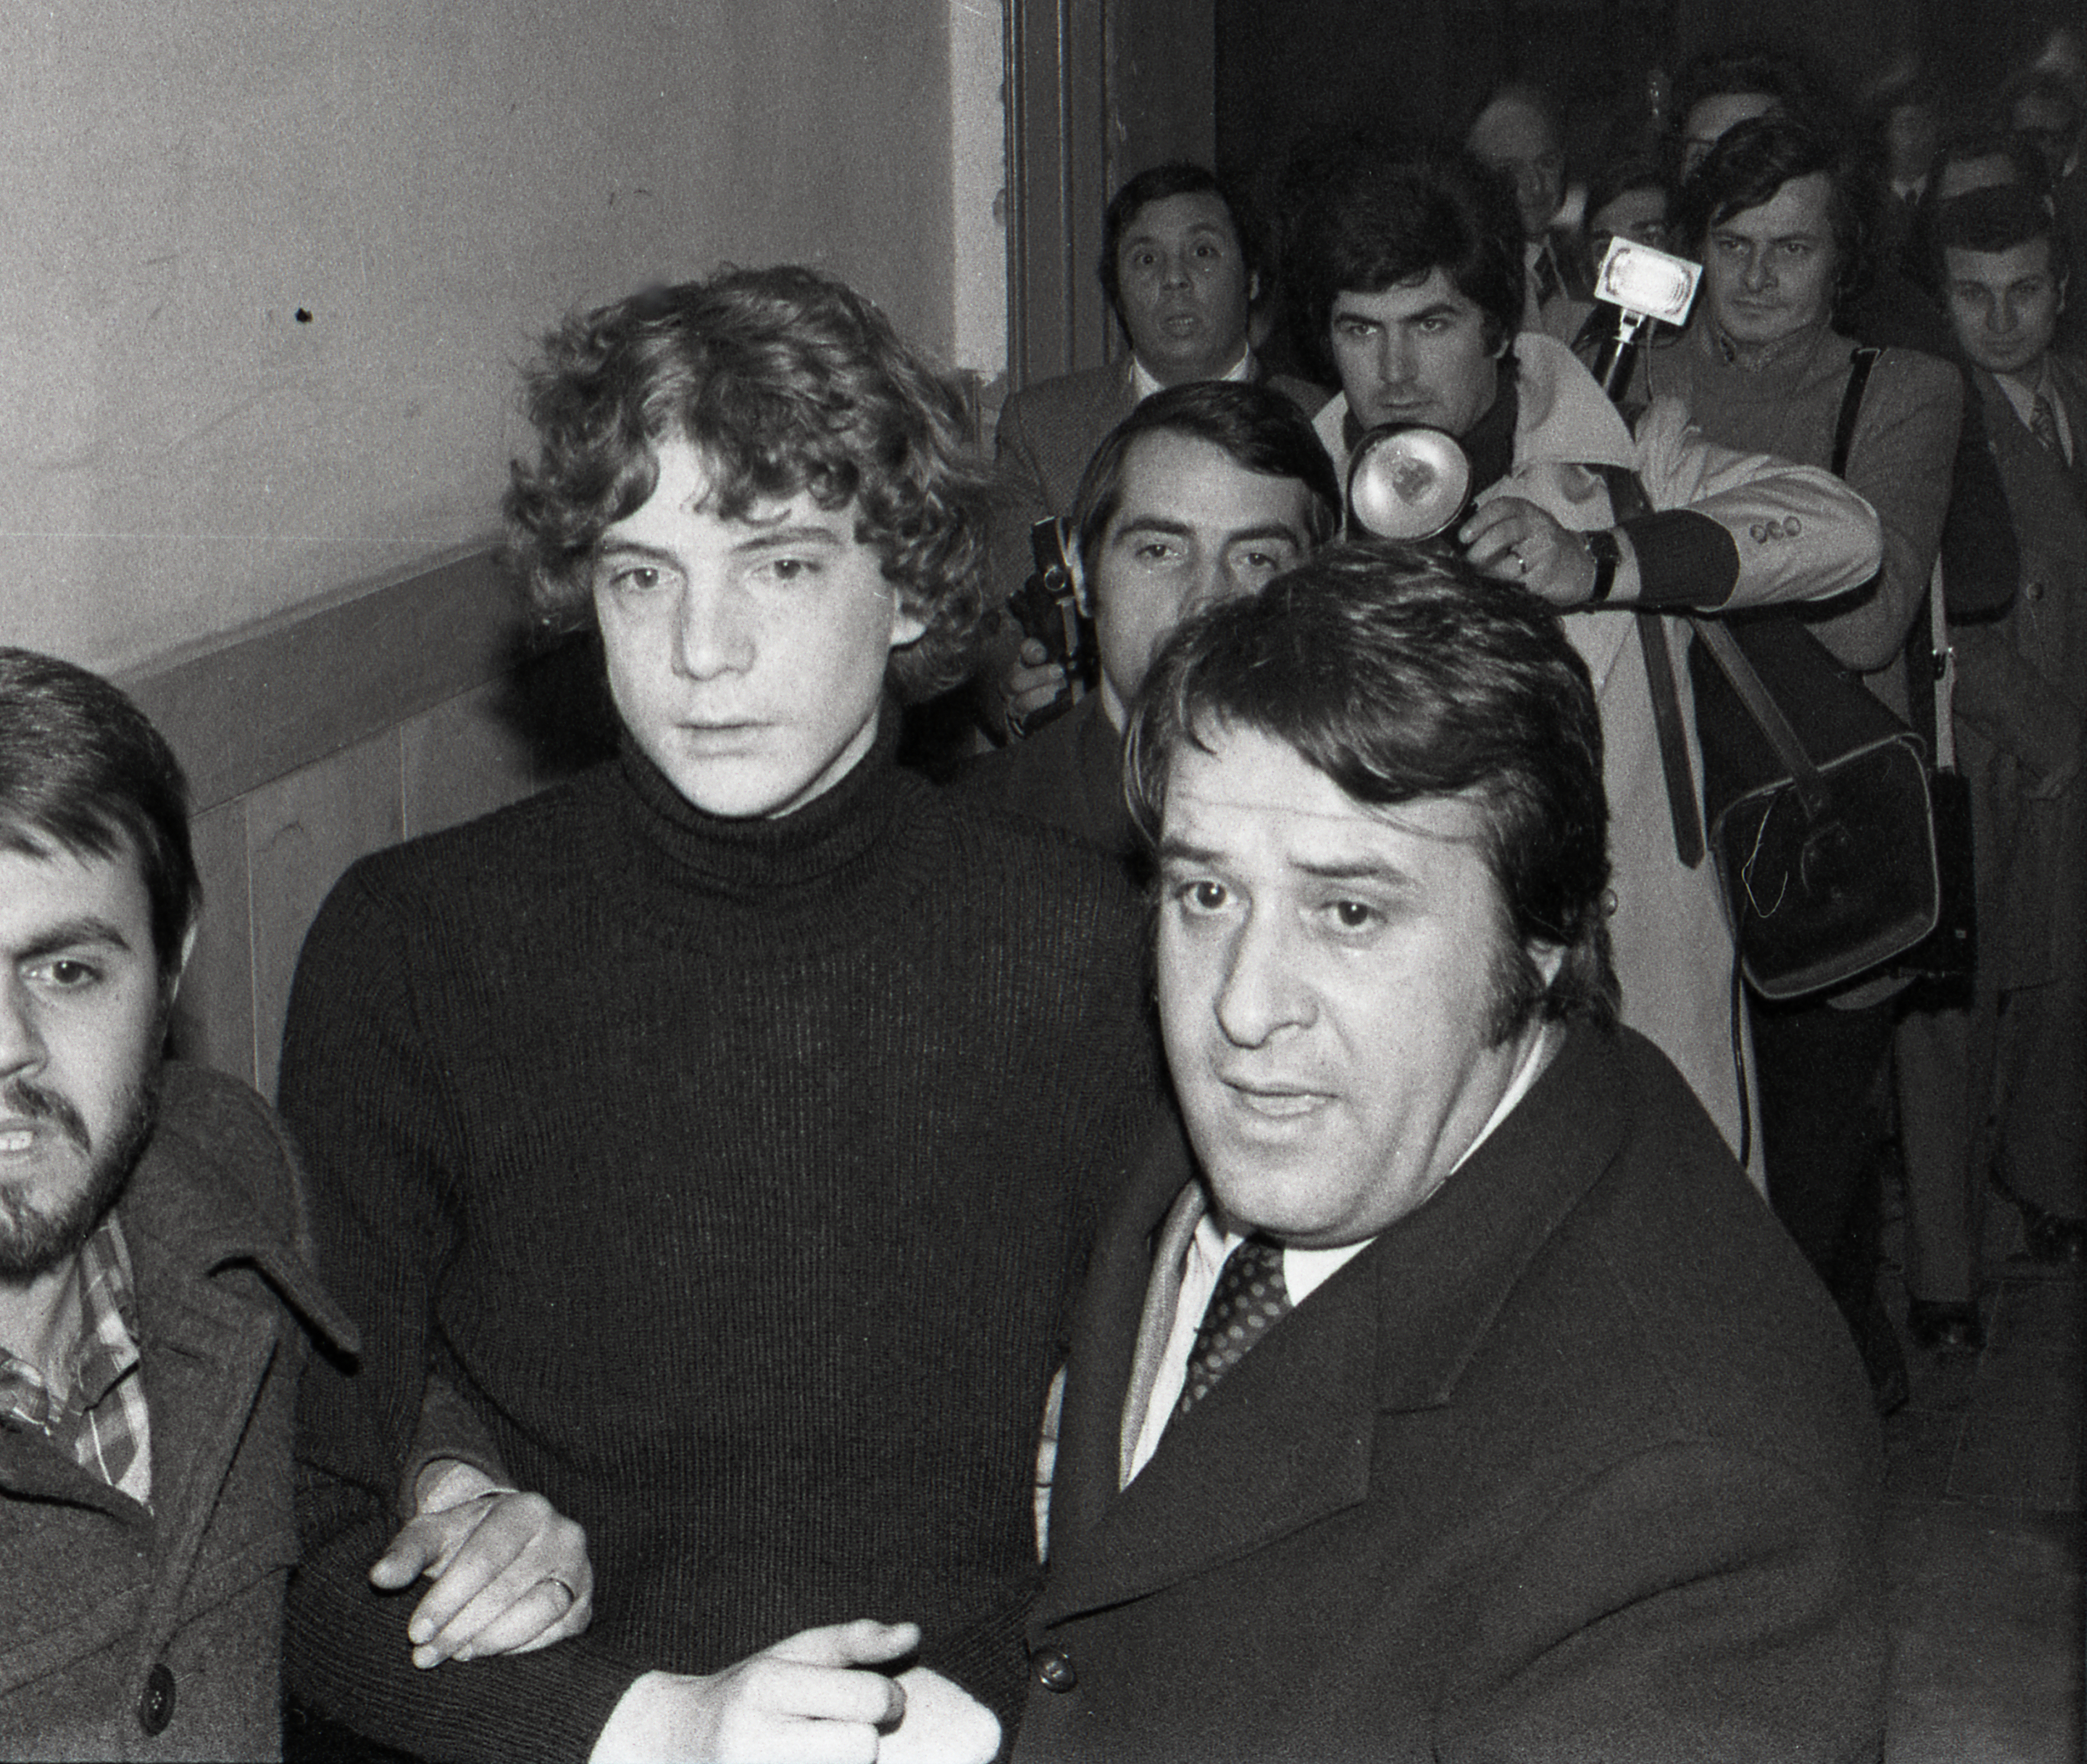 John Paul Getty III is escorted by plainclothes police as he arrives at Rome's Police Headquarters, on December 15, 1973. | Source: Getty Images